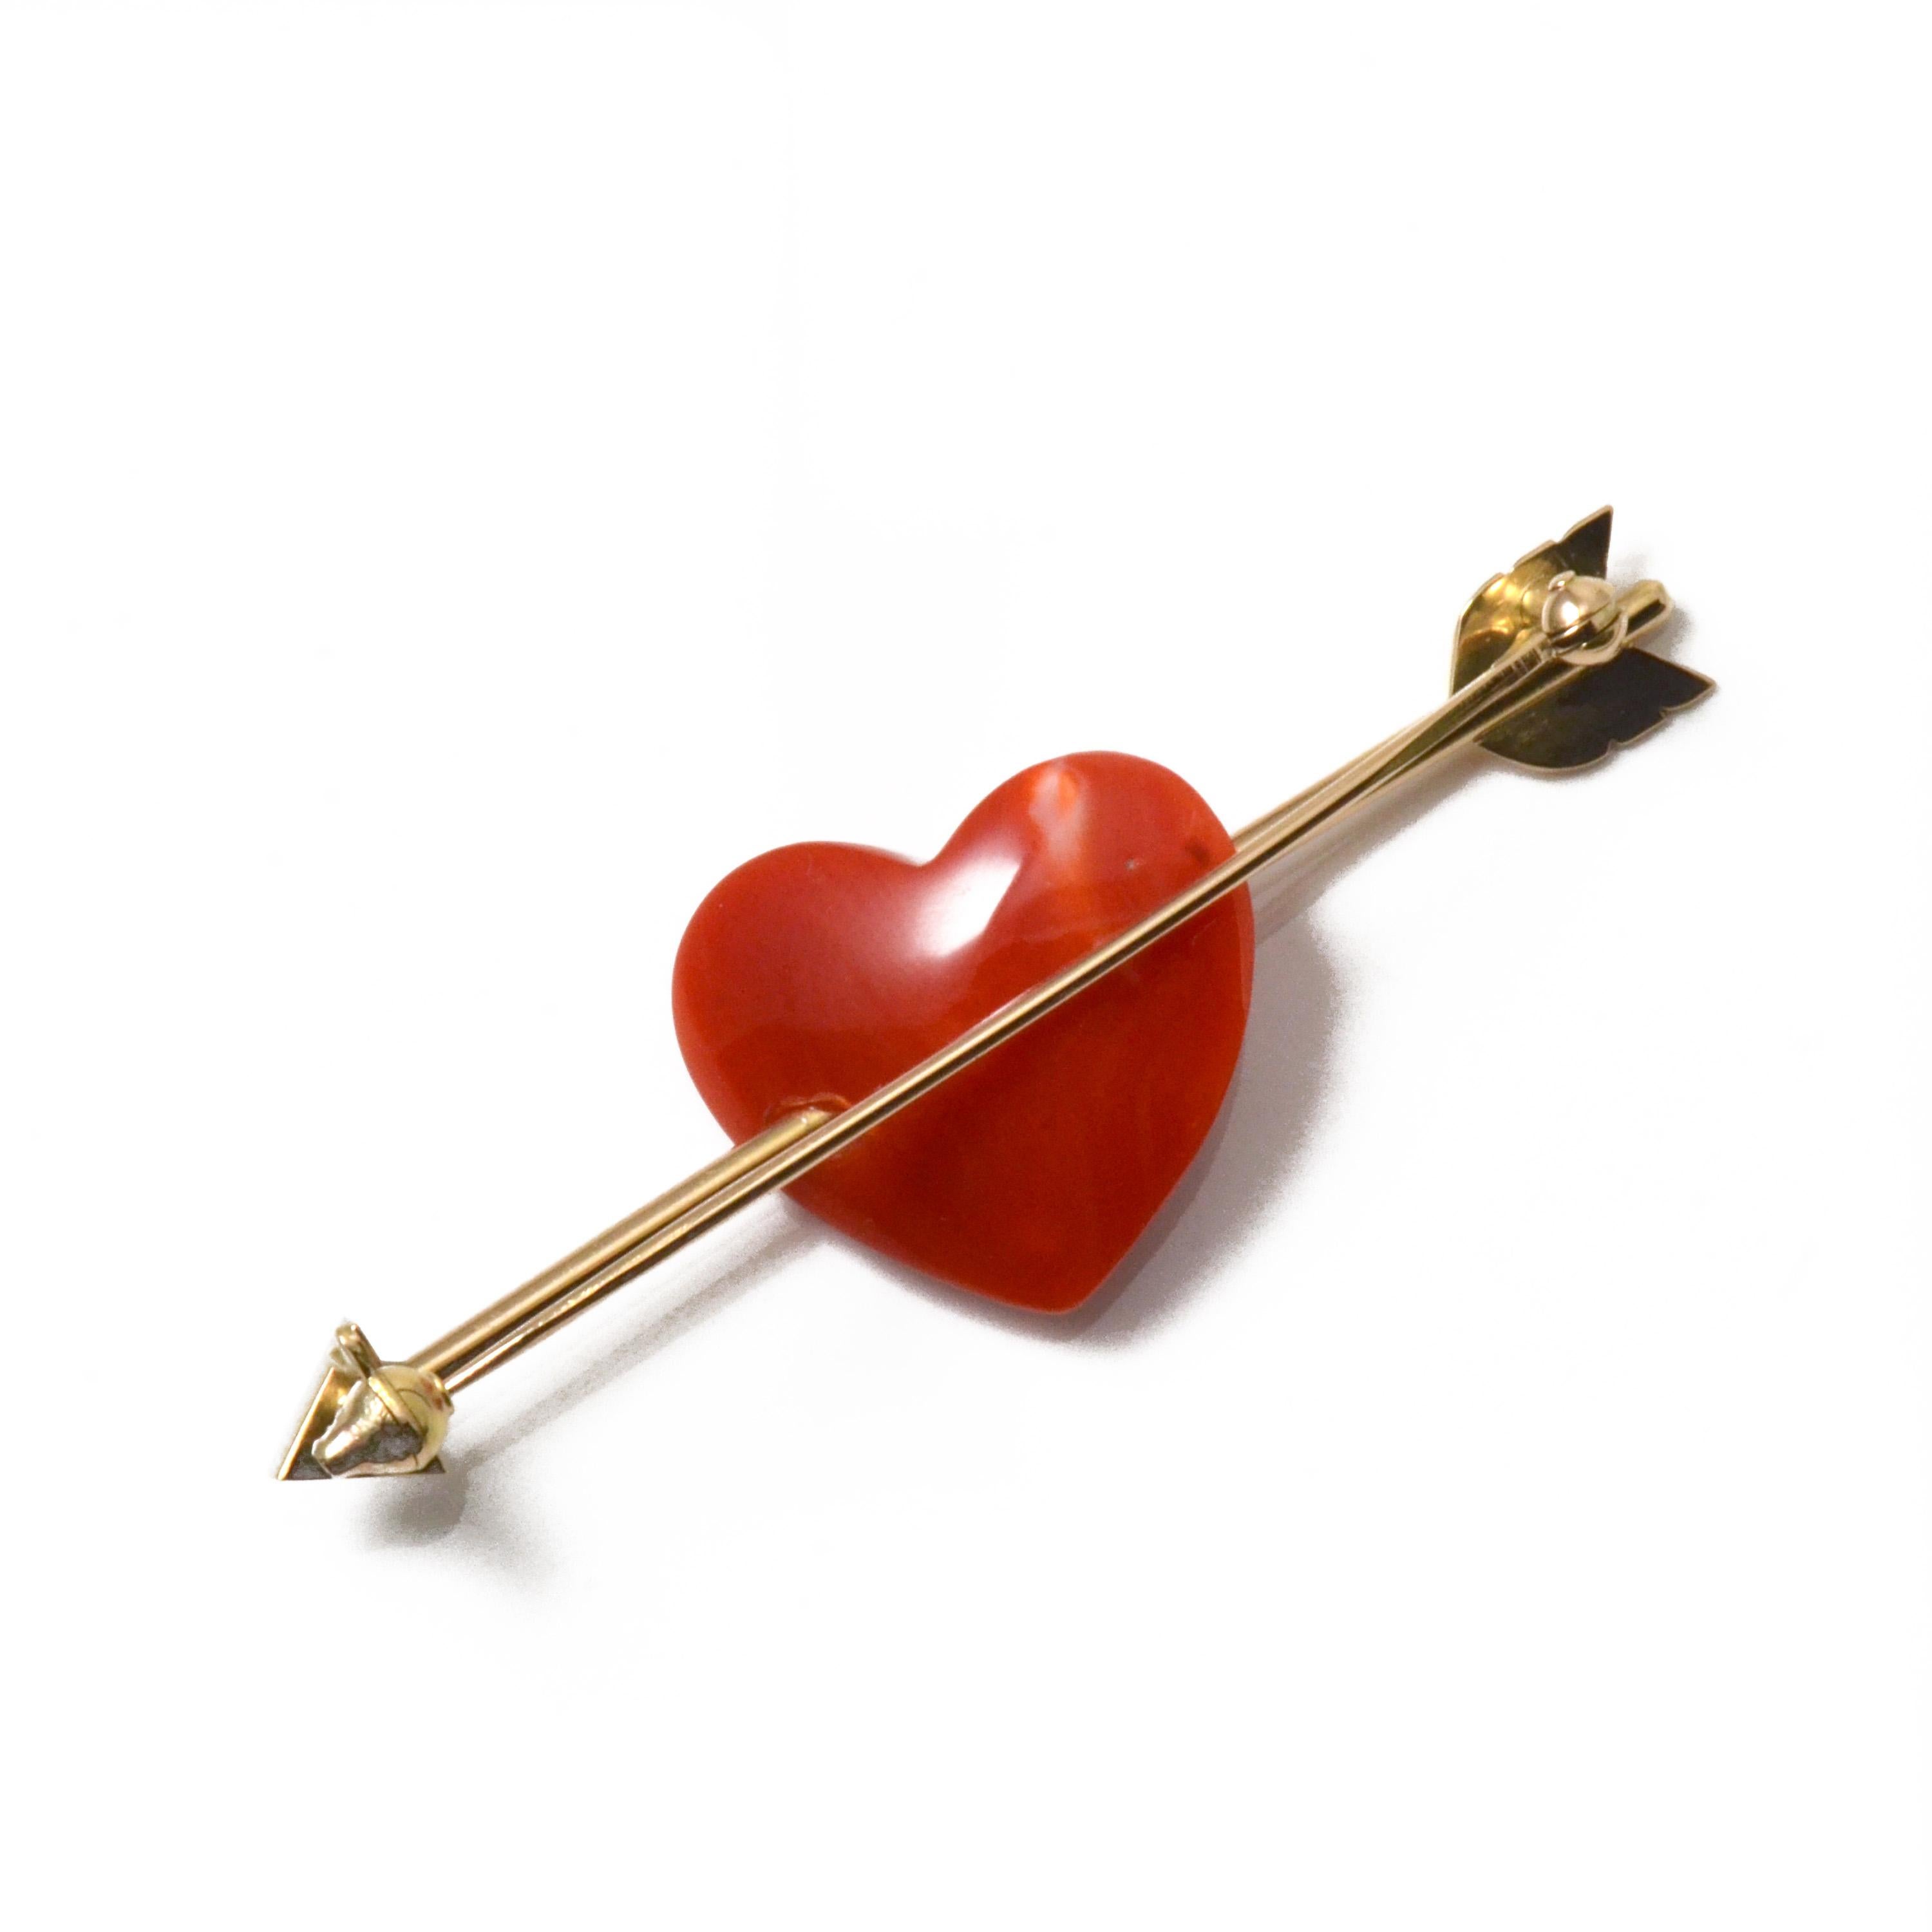 This is an 18 Karat Yellow Gold Heart Shaped Chiaka Sango (Oxblood Coral) Arrow Brooch with Diamonds. An 18 karat gold arrow pierces the Chiaka Sango (Oxblood Coral) heart, with three diamonds delicately set at the tip of the arrow. Matte and mirror